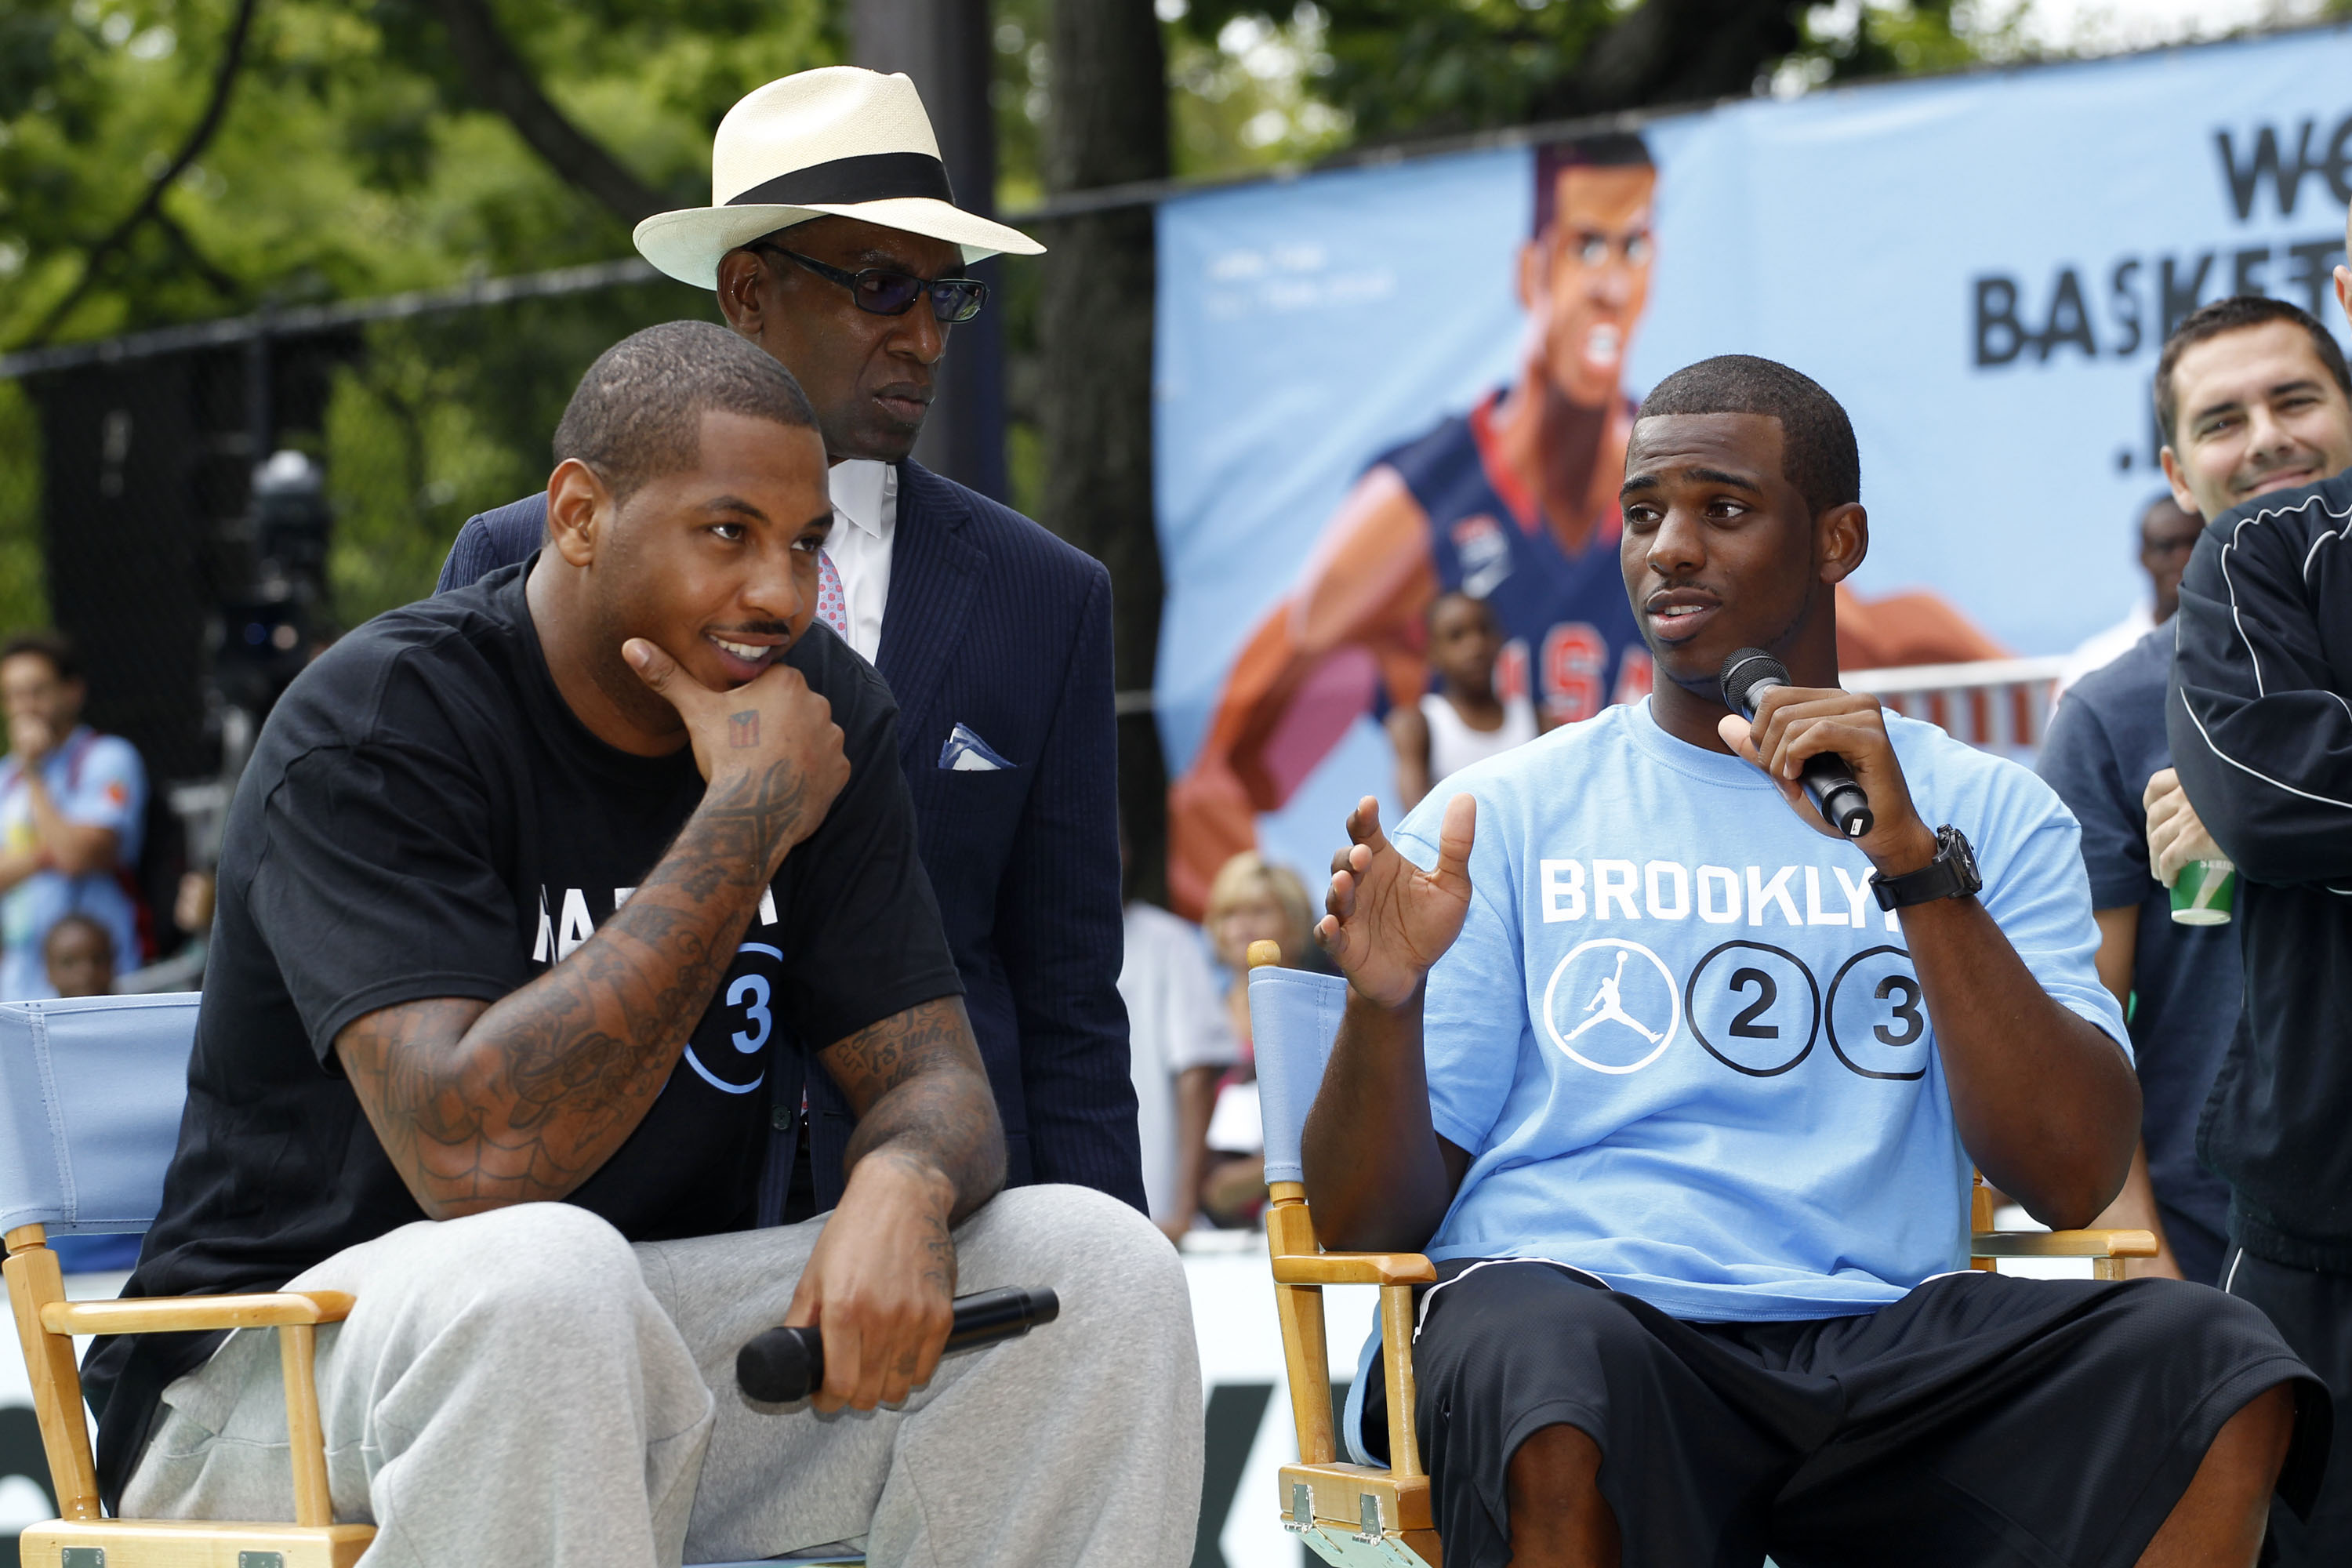 NEW YORK CITY, NY - AUGUST 13: Carmelo Anthony (L) and Chris Paul of USAB speak during the World Basketball Festival at Rucker Park on August 13, 2010 in New York City.  (Photo by Chris Trotman/Getty Images for Nike)